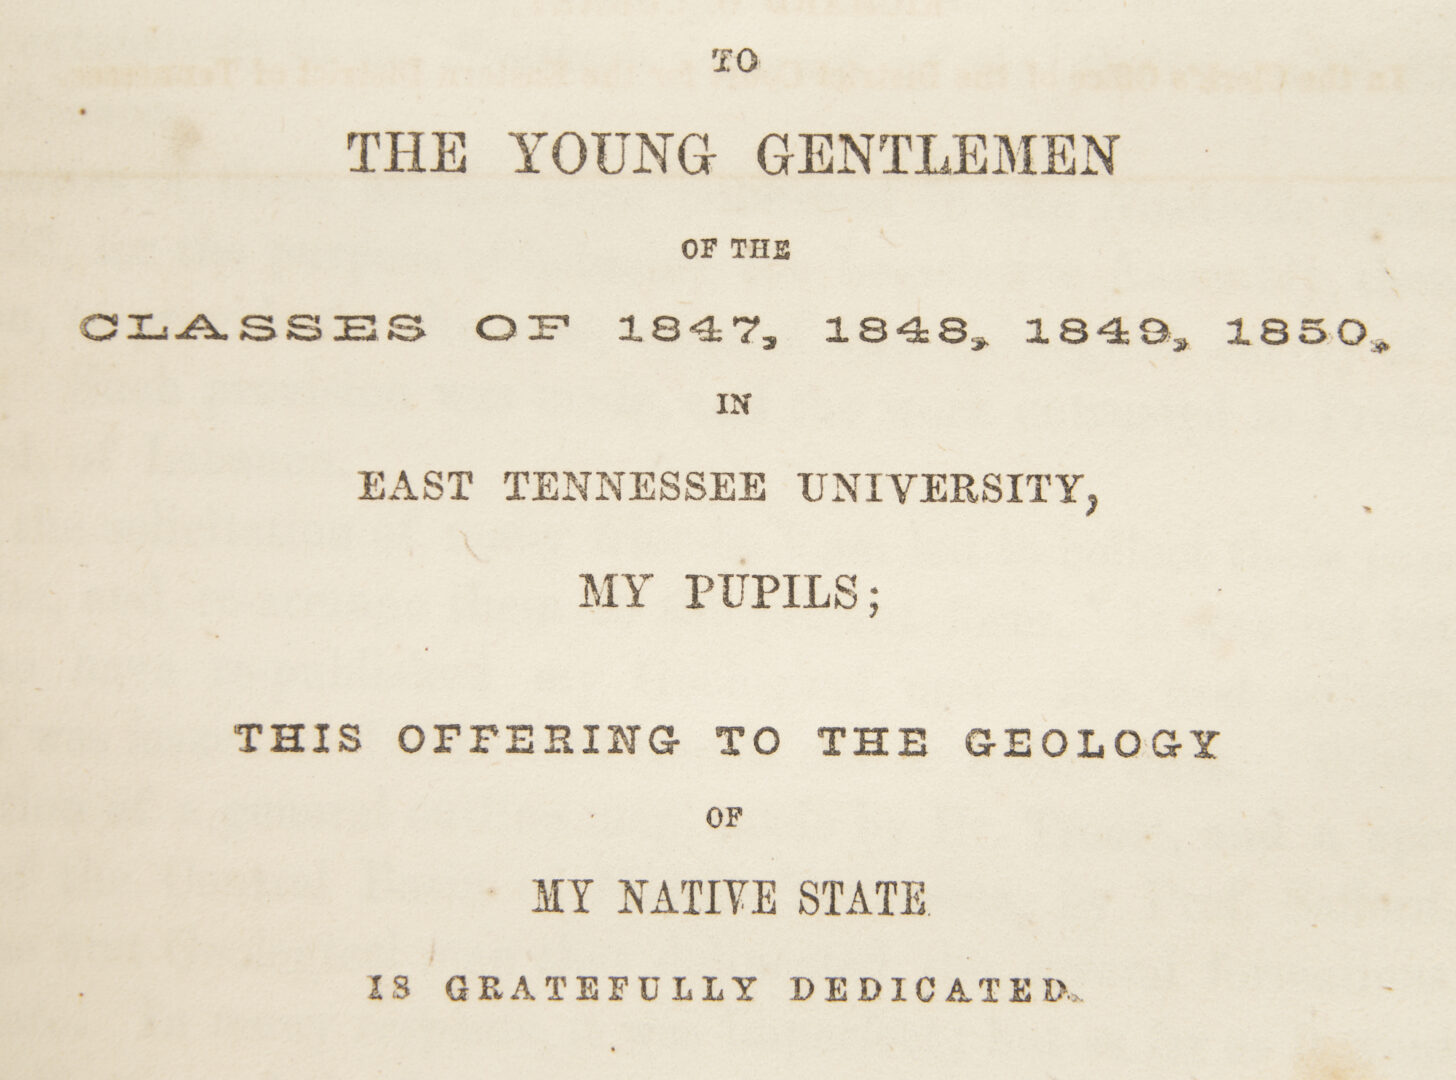 Lot 628: 7 Early Tennessee Geological Reports, incl. 3 TN Maps & author Troost inscribed